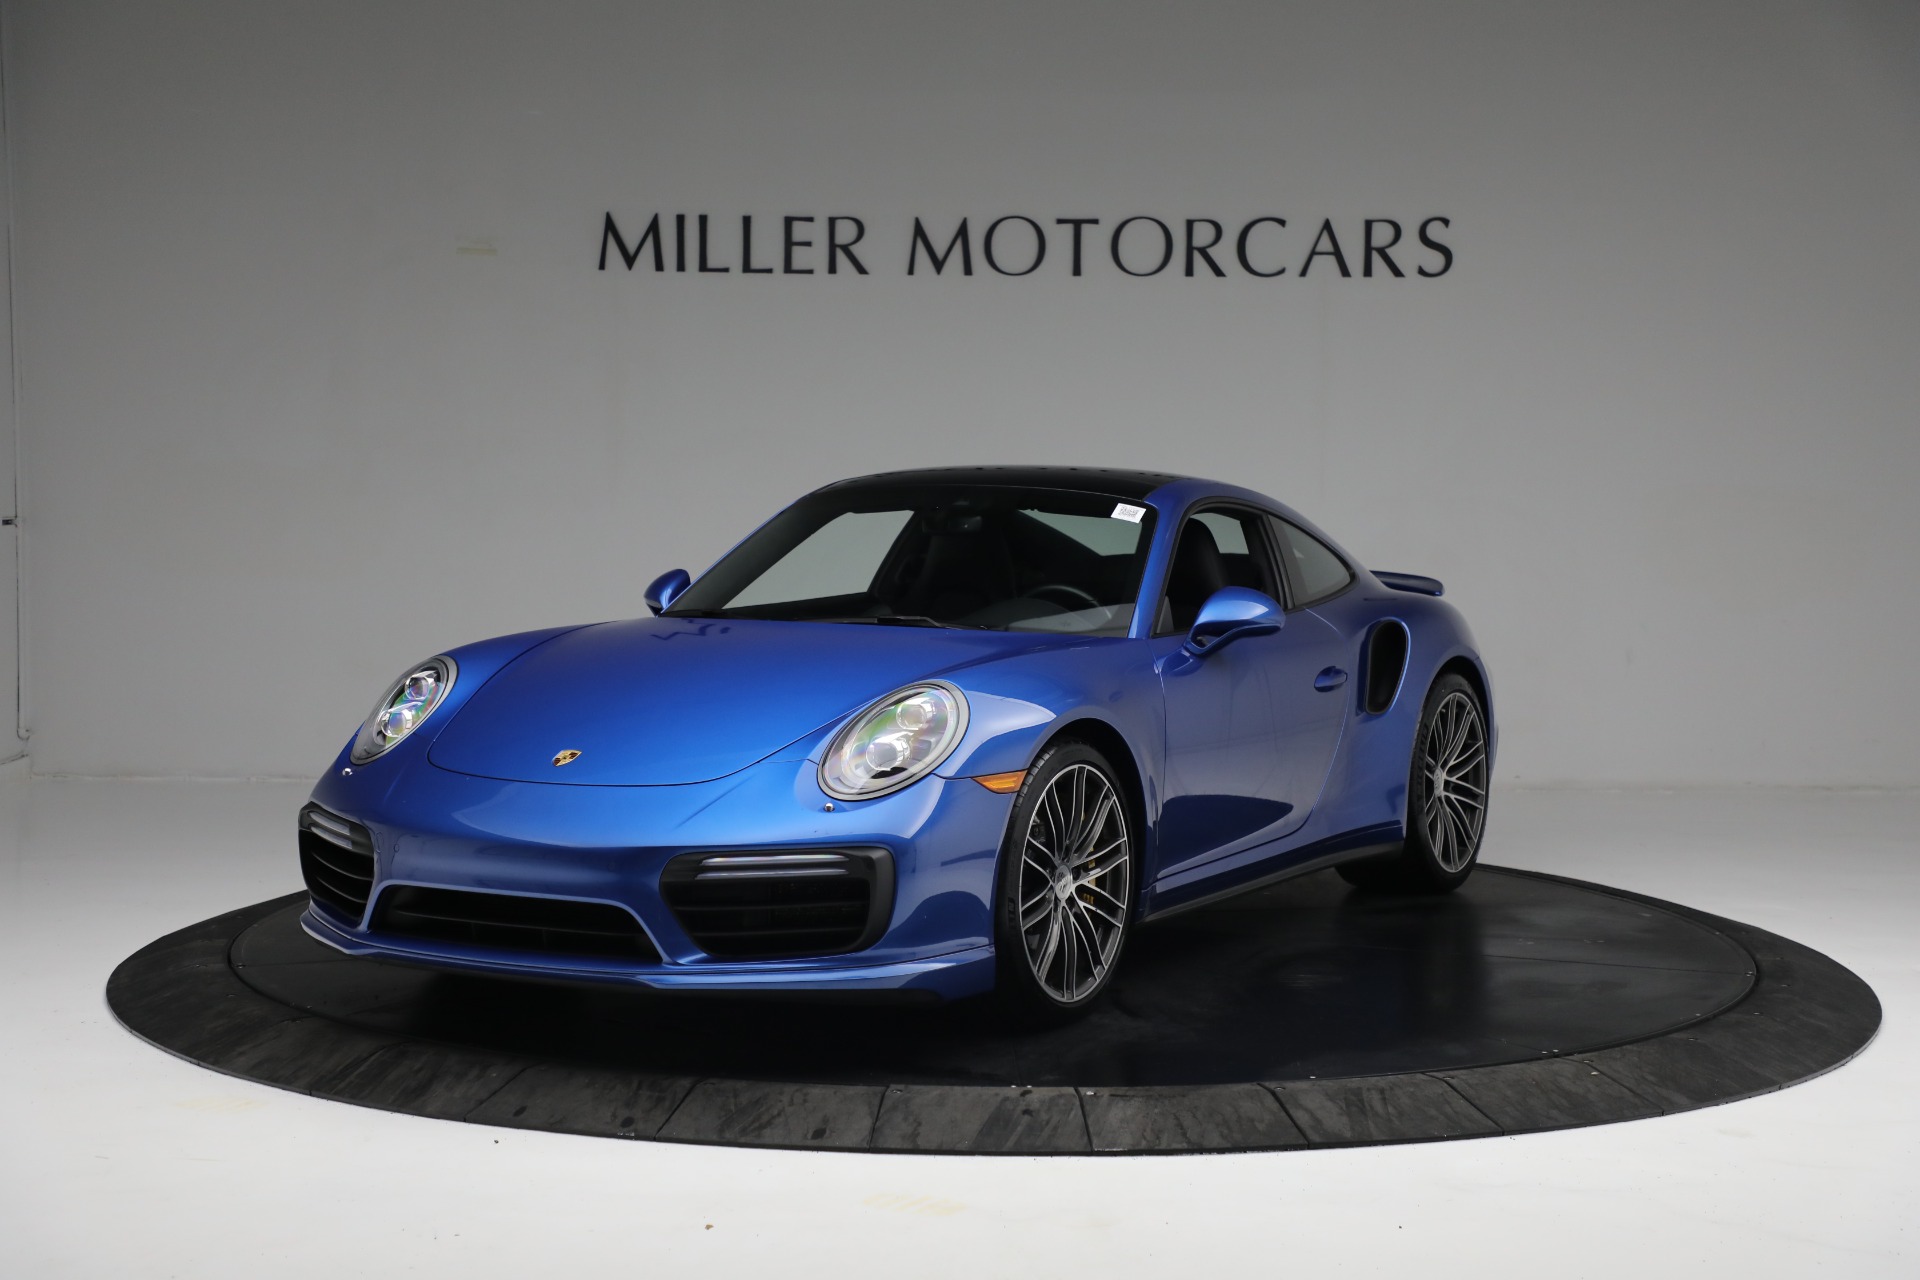 Used 2017 Porsche 911 Turbo S for sale $173,900 at Rolls-Royce Motor Cars Greenwich in Greenwich CT 06830 1